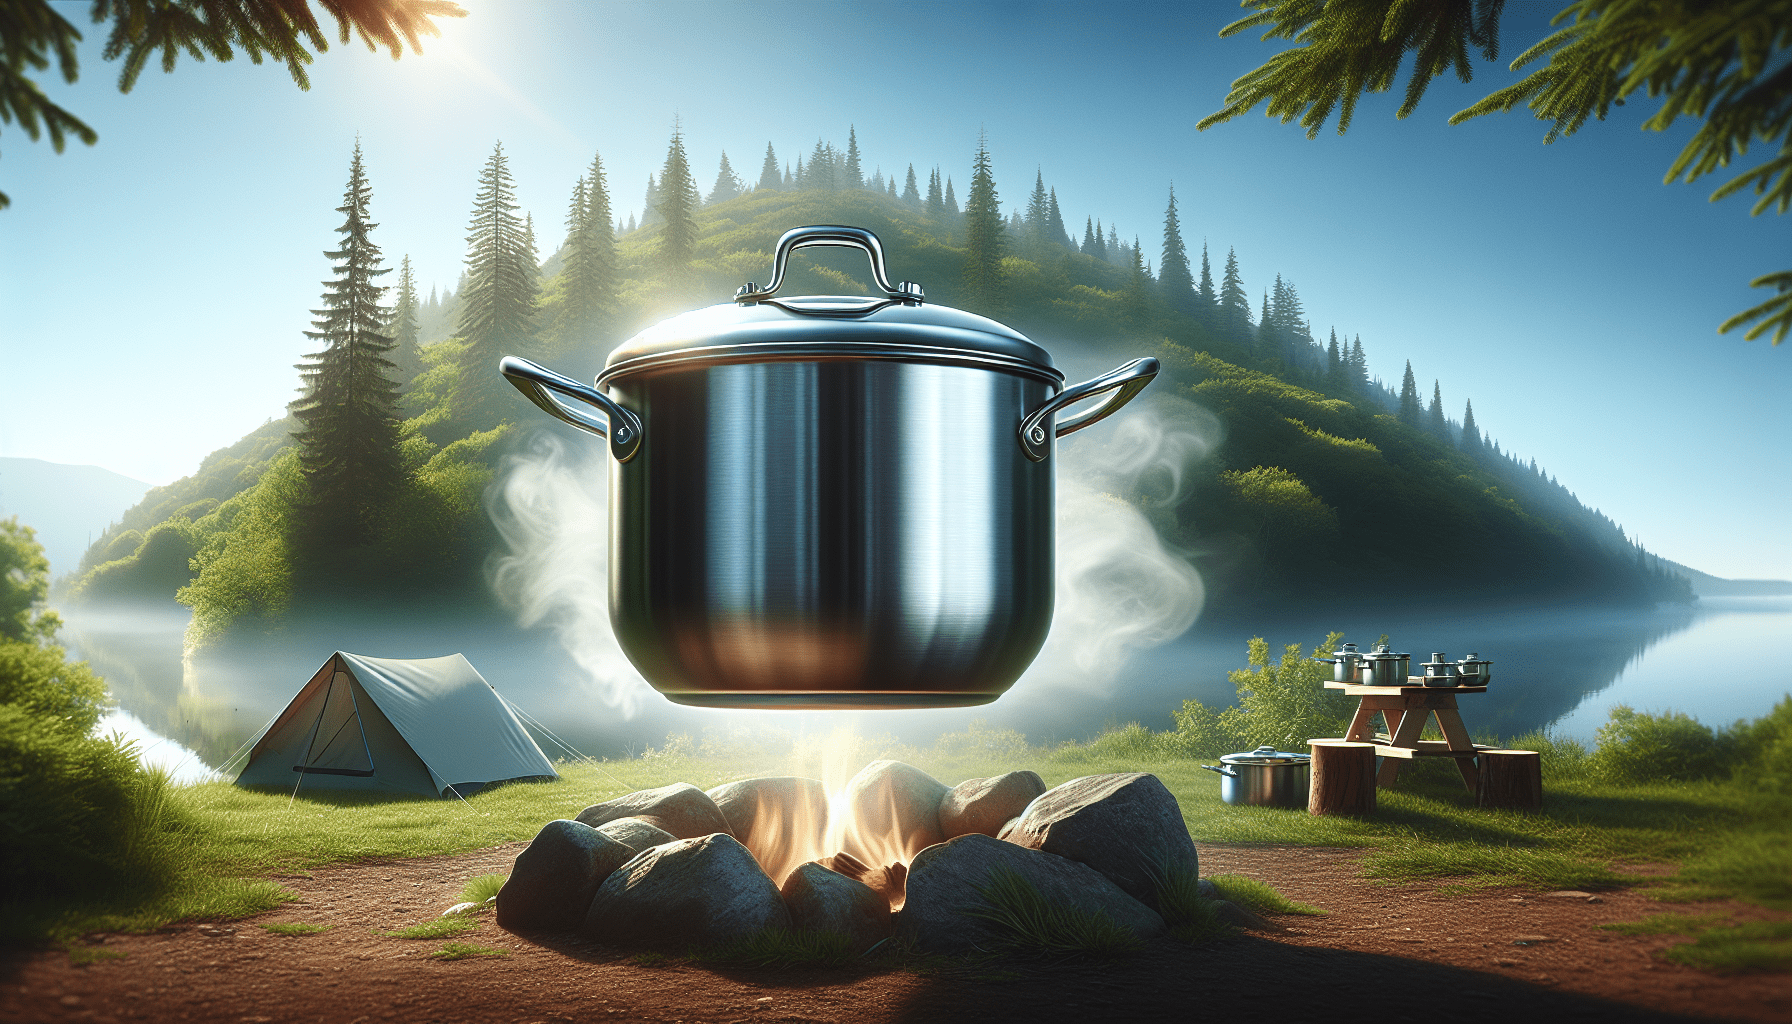 What Is Camping Cookware Made Of?